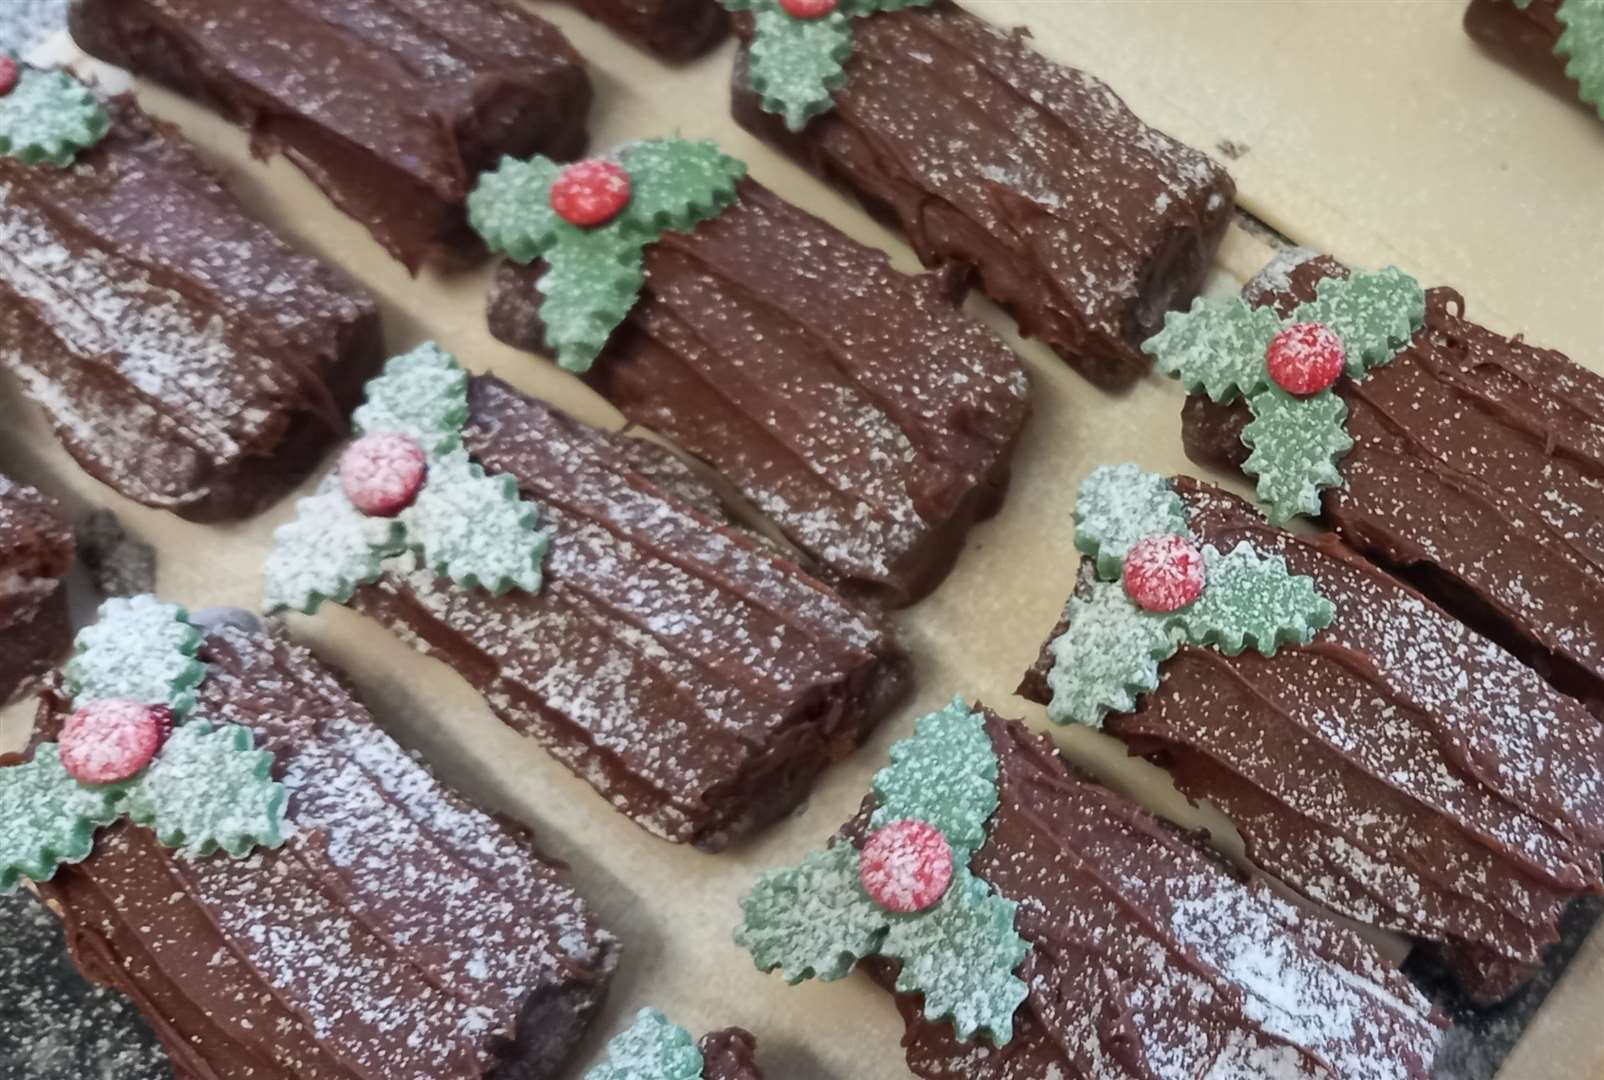 The mini yule logs they created for the boxes